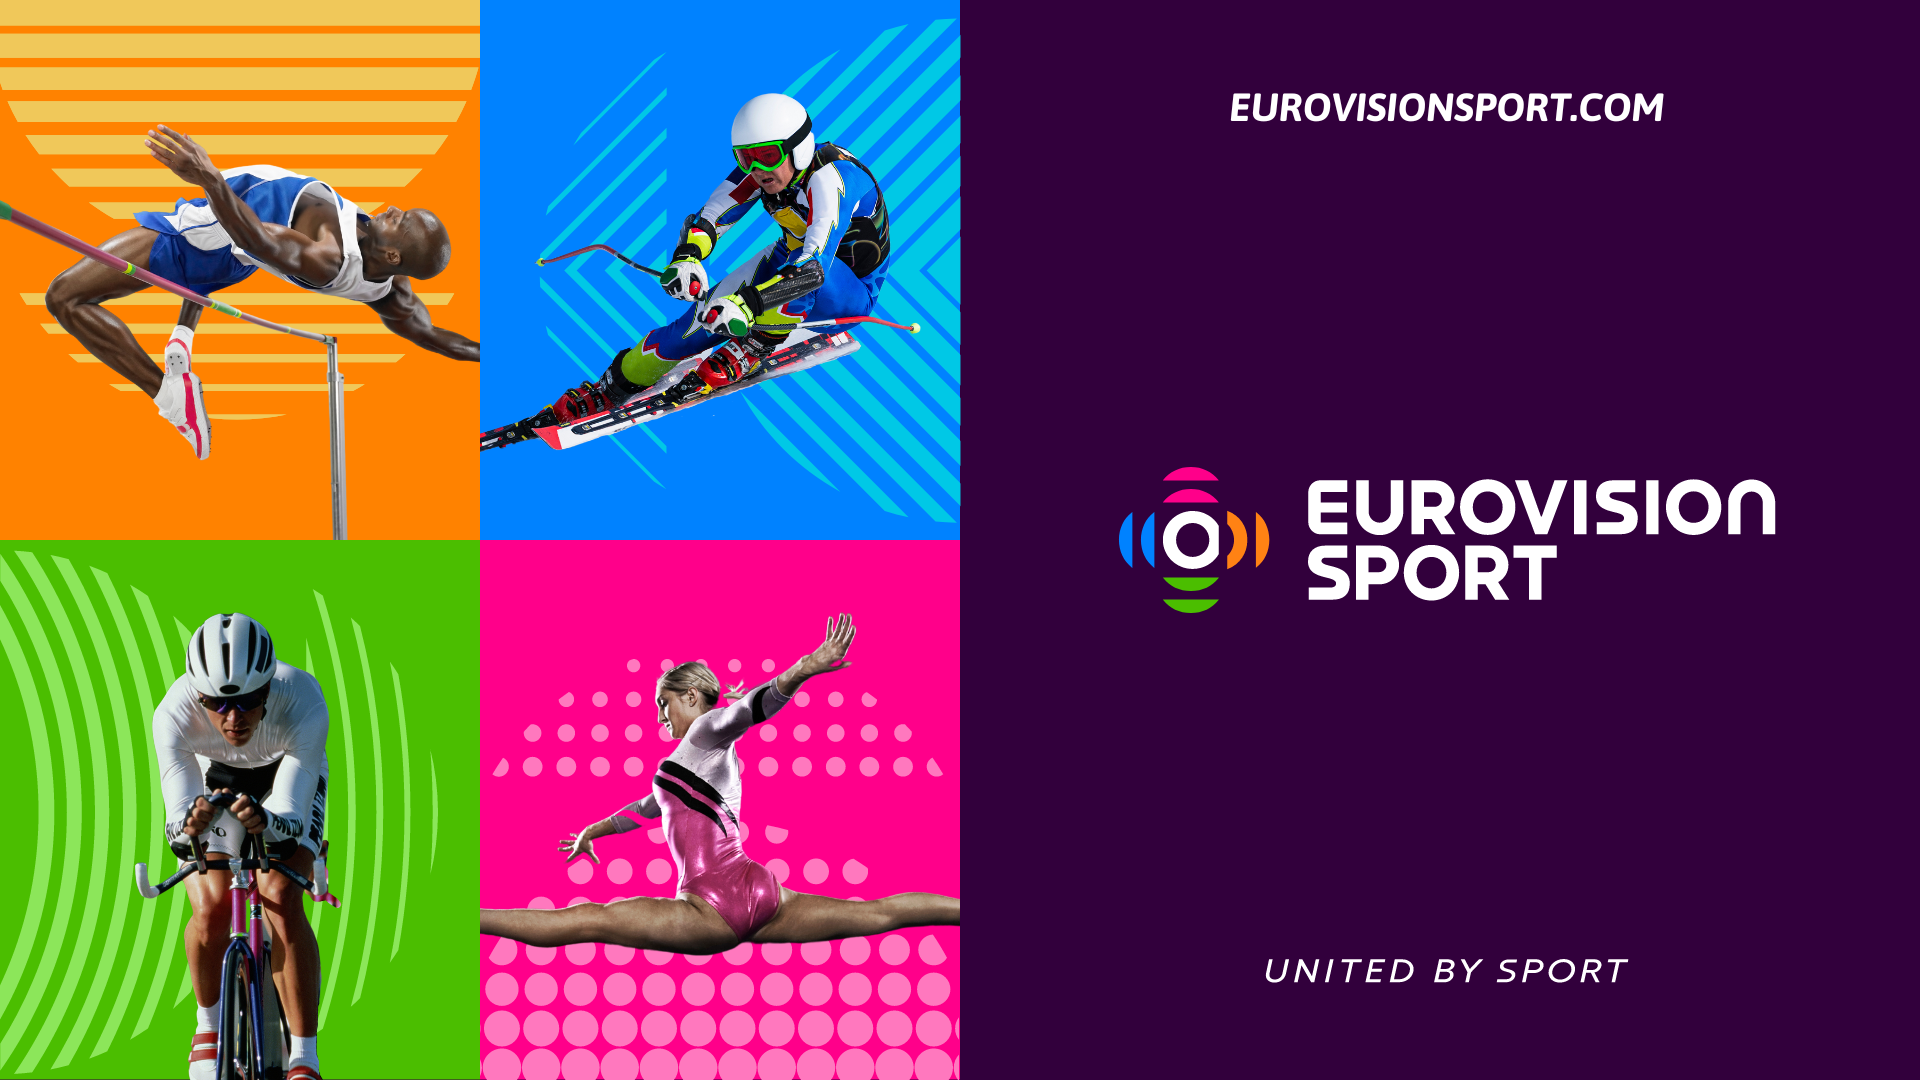 Eurovision Sports Launches a Free Live Streaming Service Available Worldwide